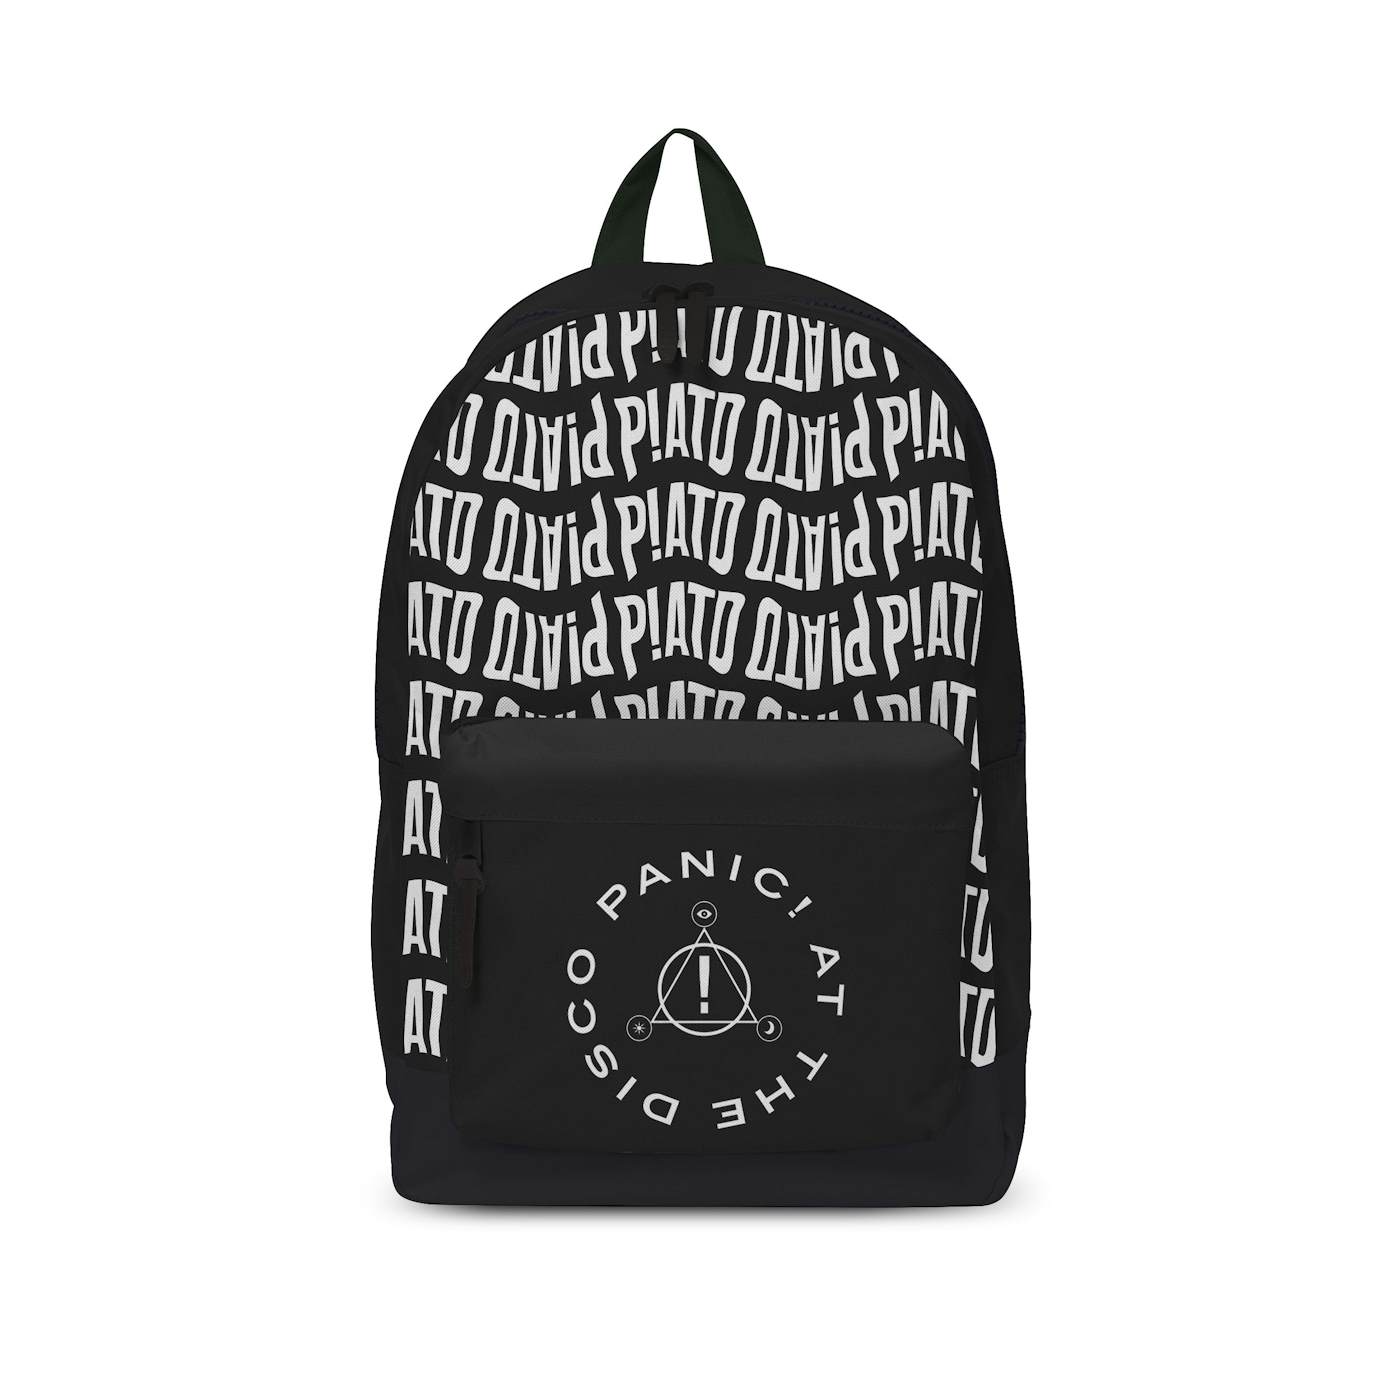 Panic! At The Disco Rocksax Panic!! At The Disco Backpack - Disco Logo